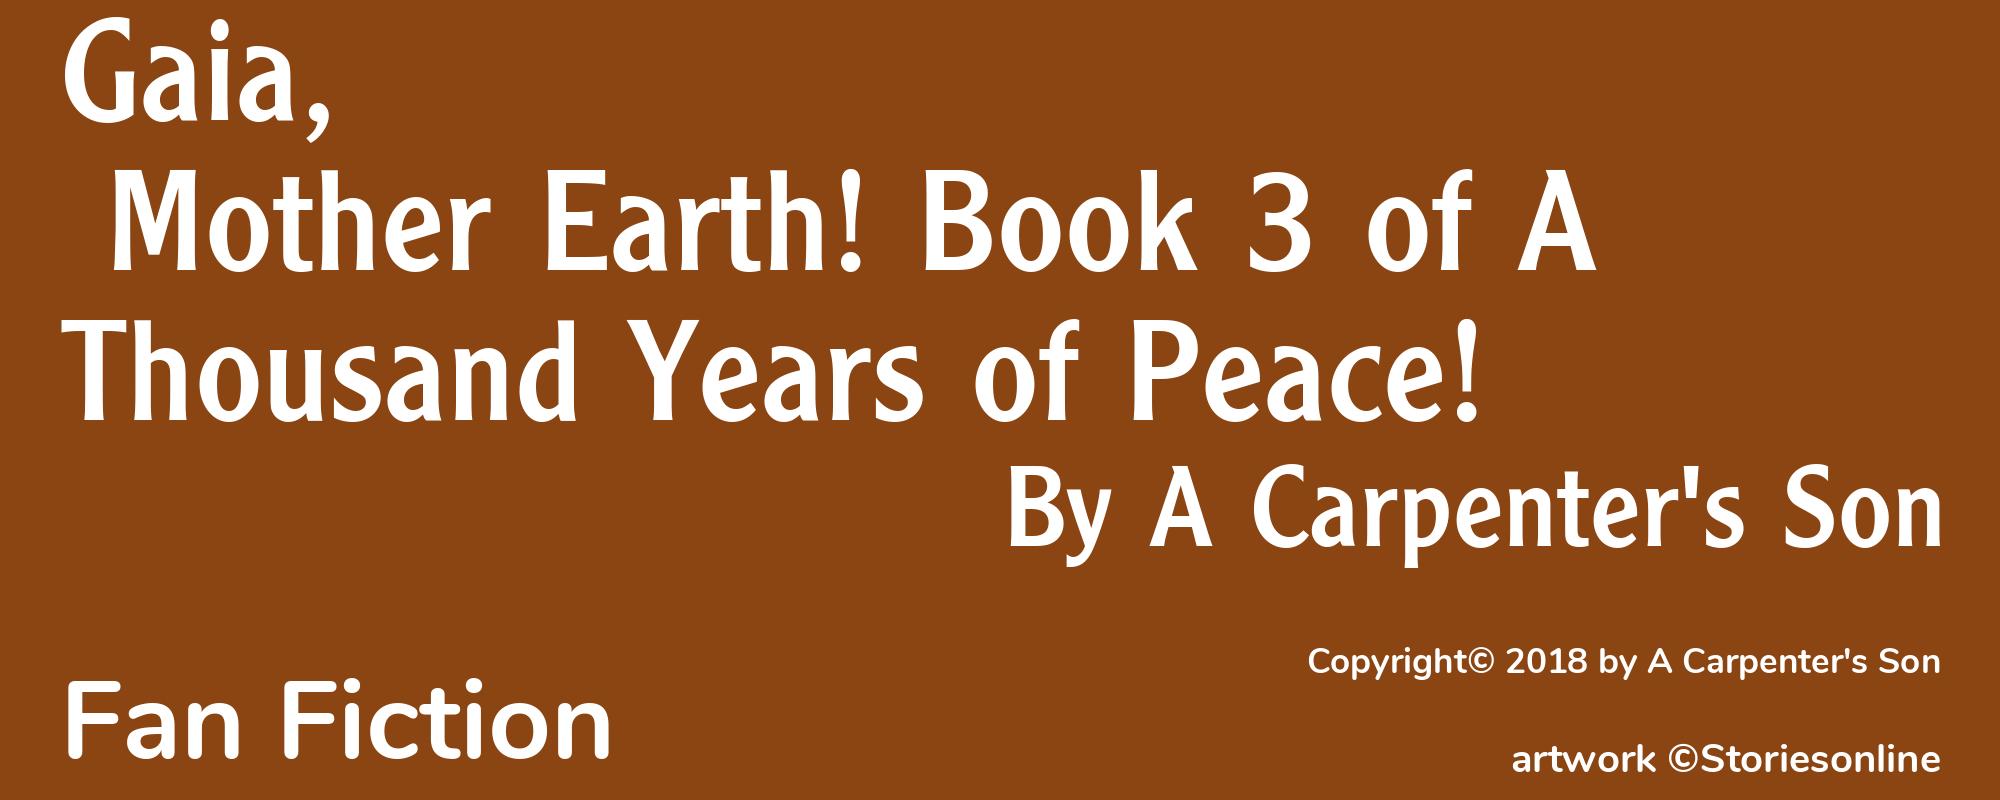 Gaia, Mother Earth! Book 3 of A Thousand Years of Peace! - Cover